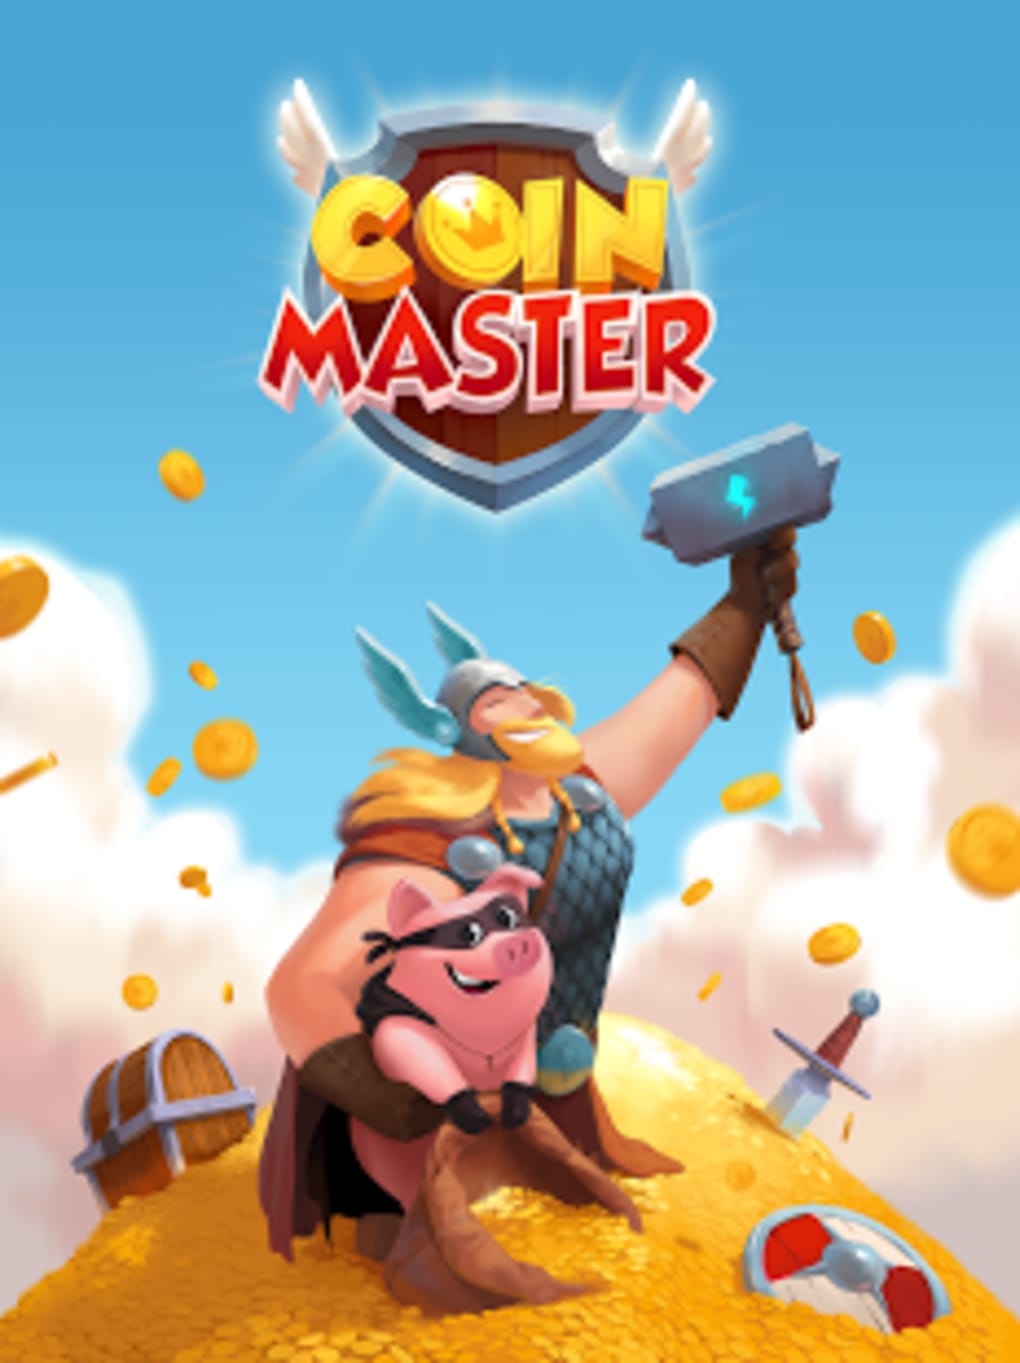 15 HQ Pictures Coin Master App Not Working - EASEUS Partition Master 11.10 Serial key - full crack 100